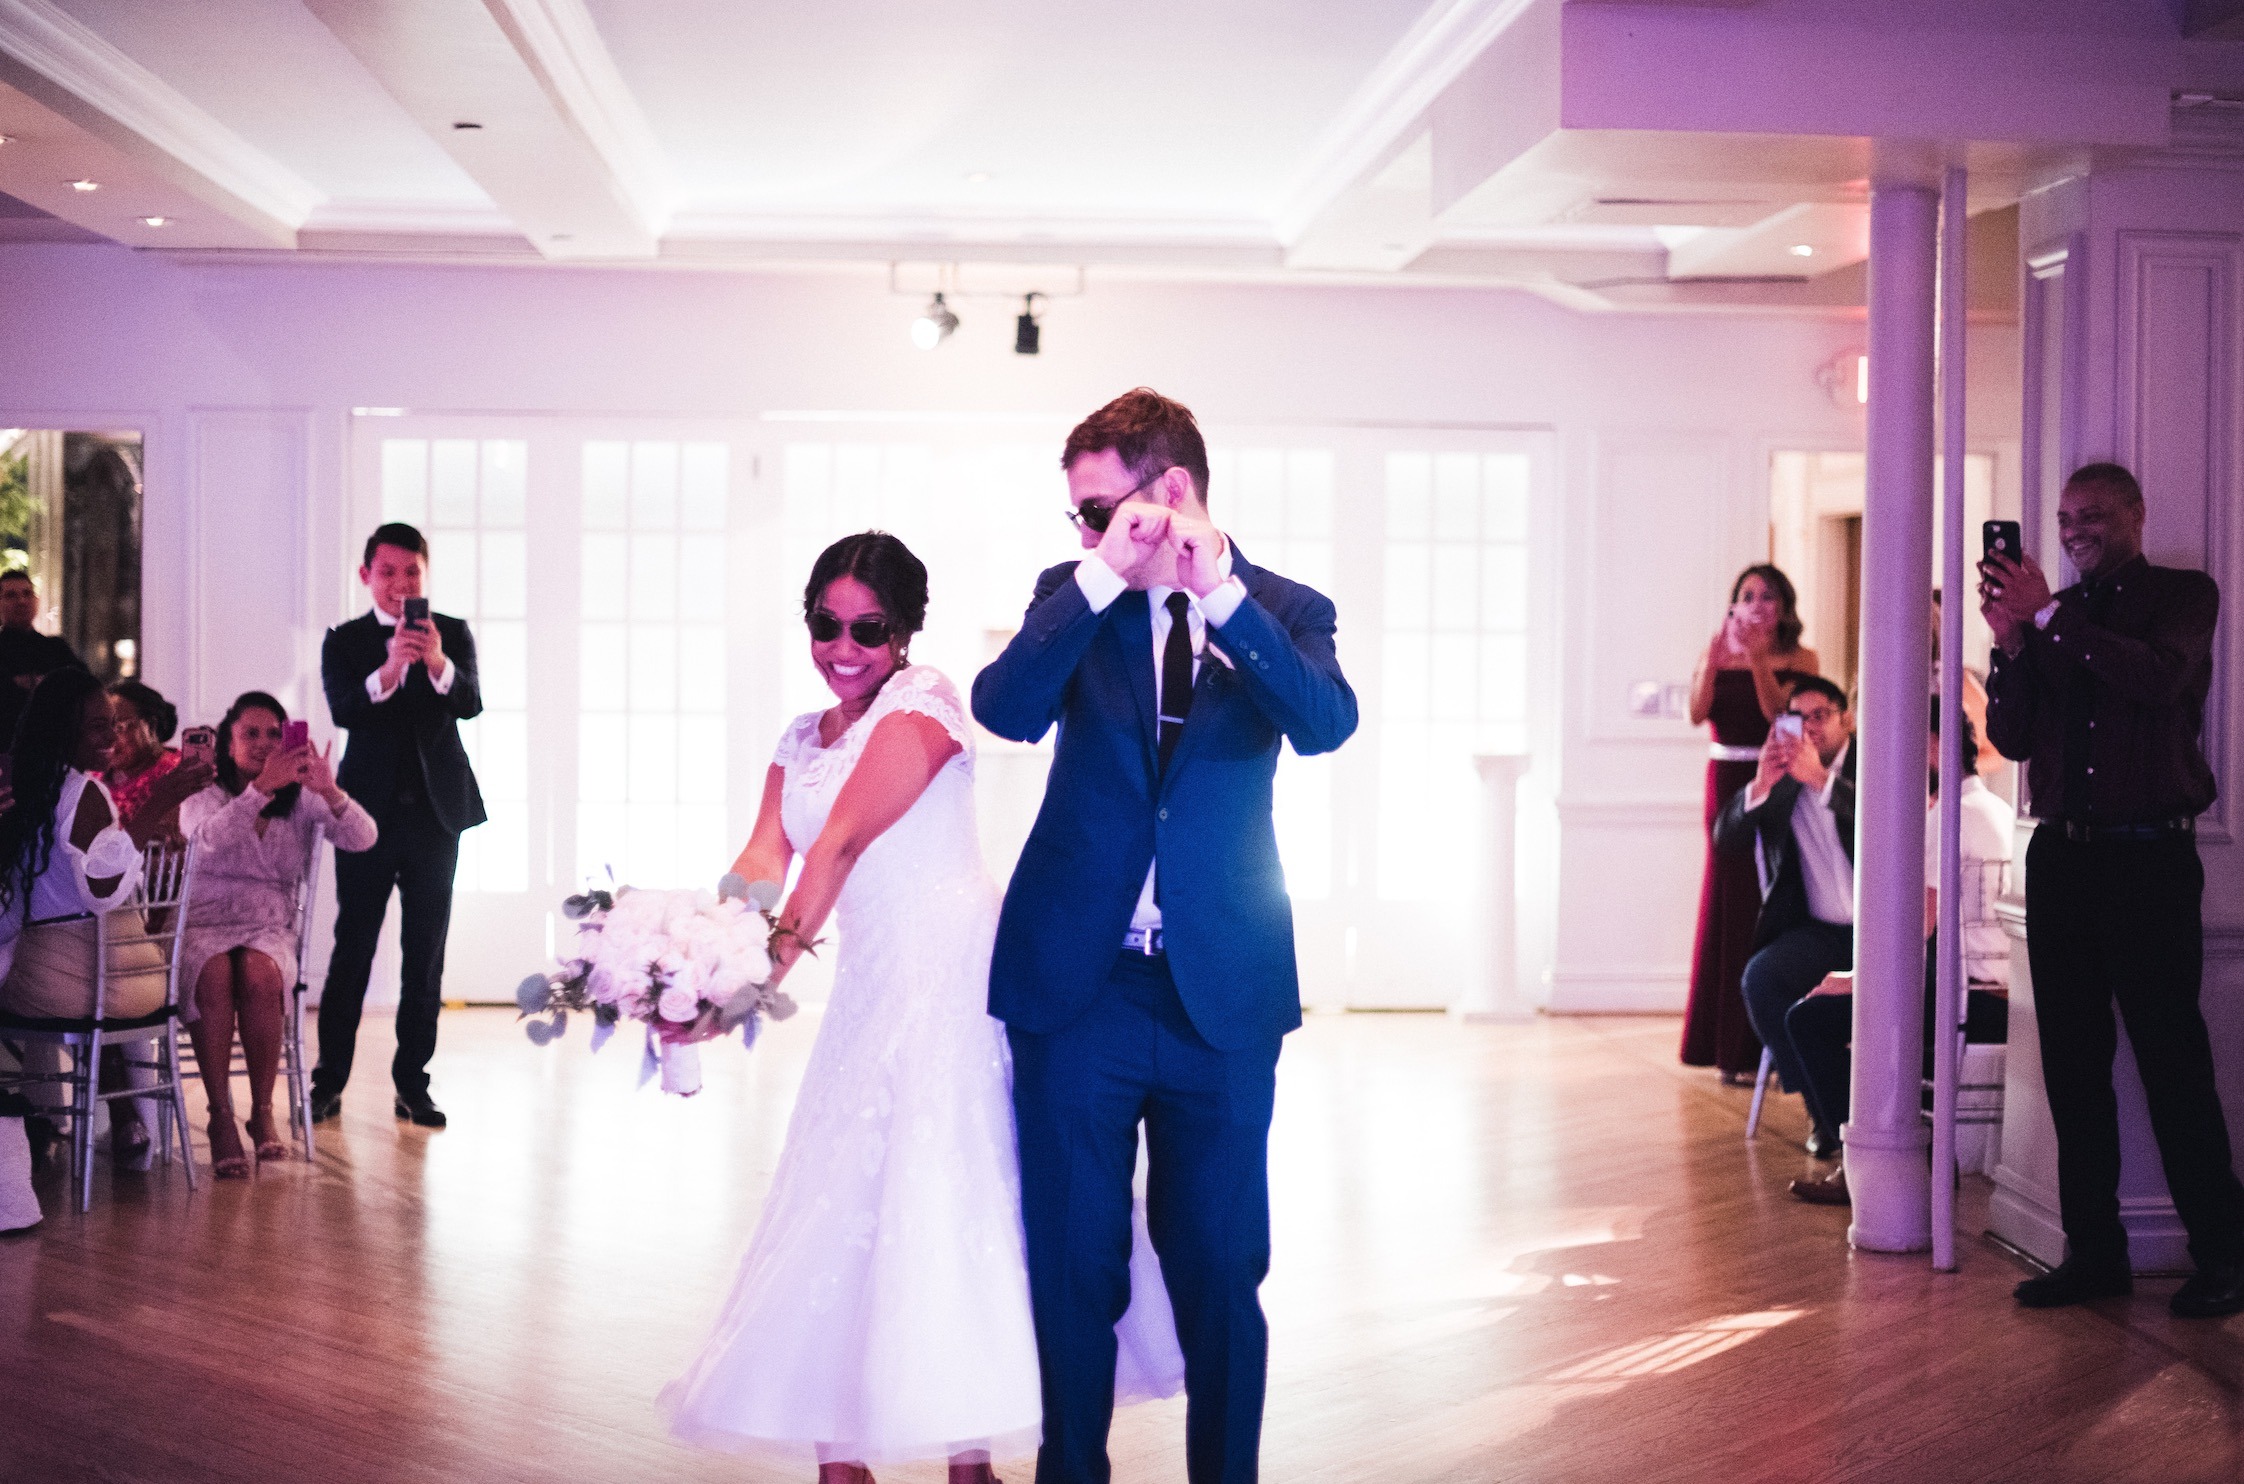 You are currently viewing The Best Wedding Songs to Walk Down the Aisle to.